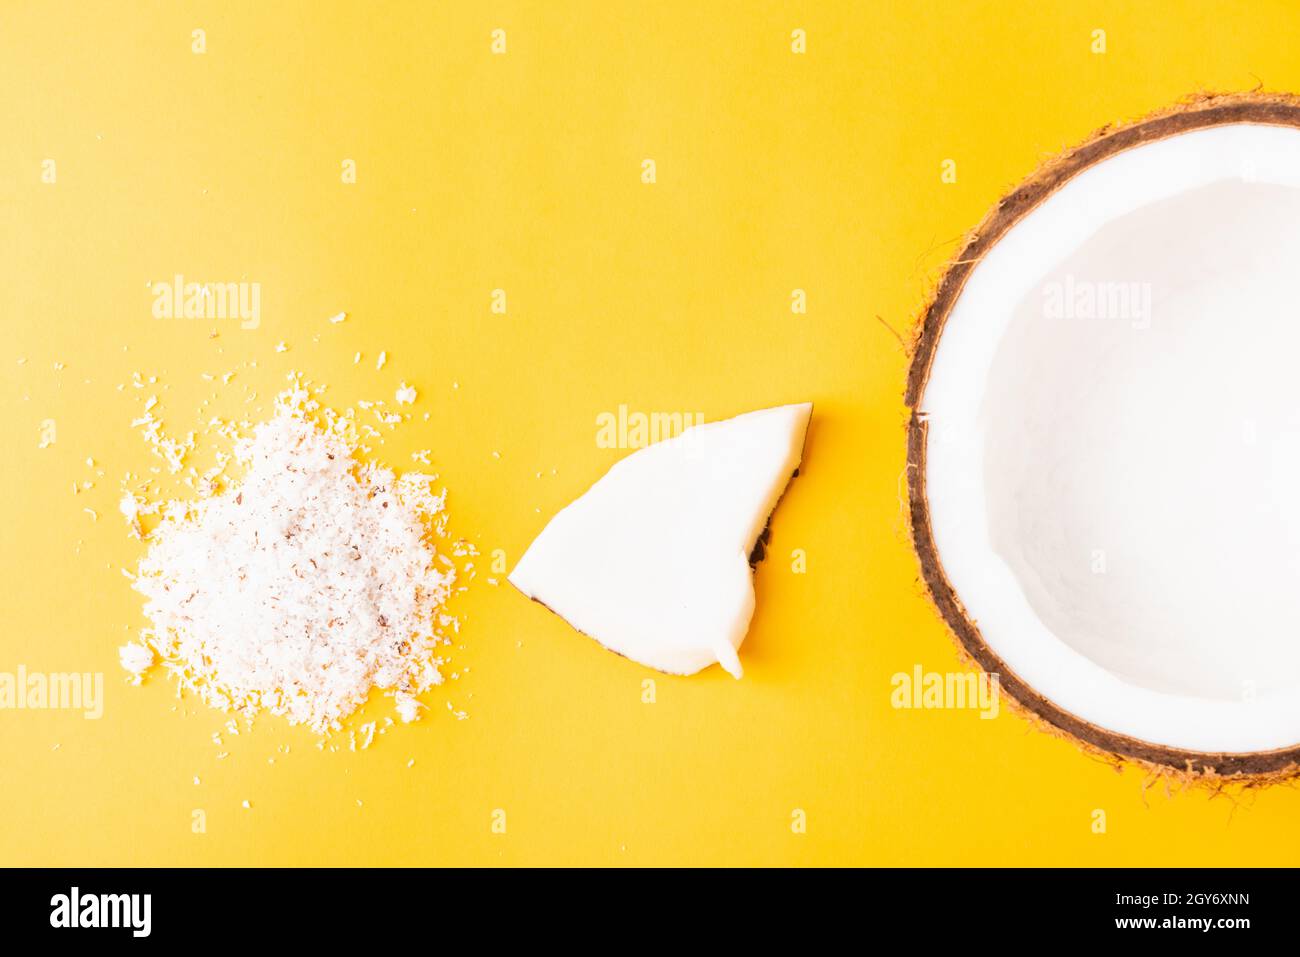 Happy coconuts day concept, fresh coconut group set different half and slices, studio shot isolated on yellow background Stock Photo